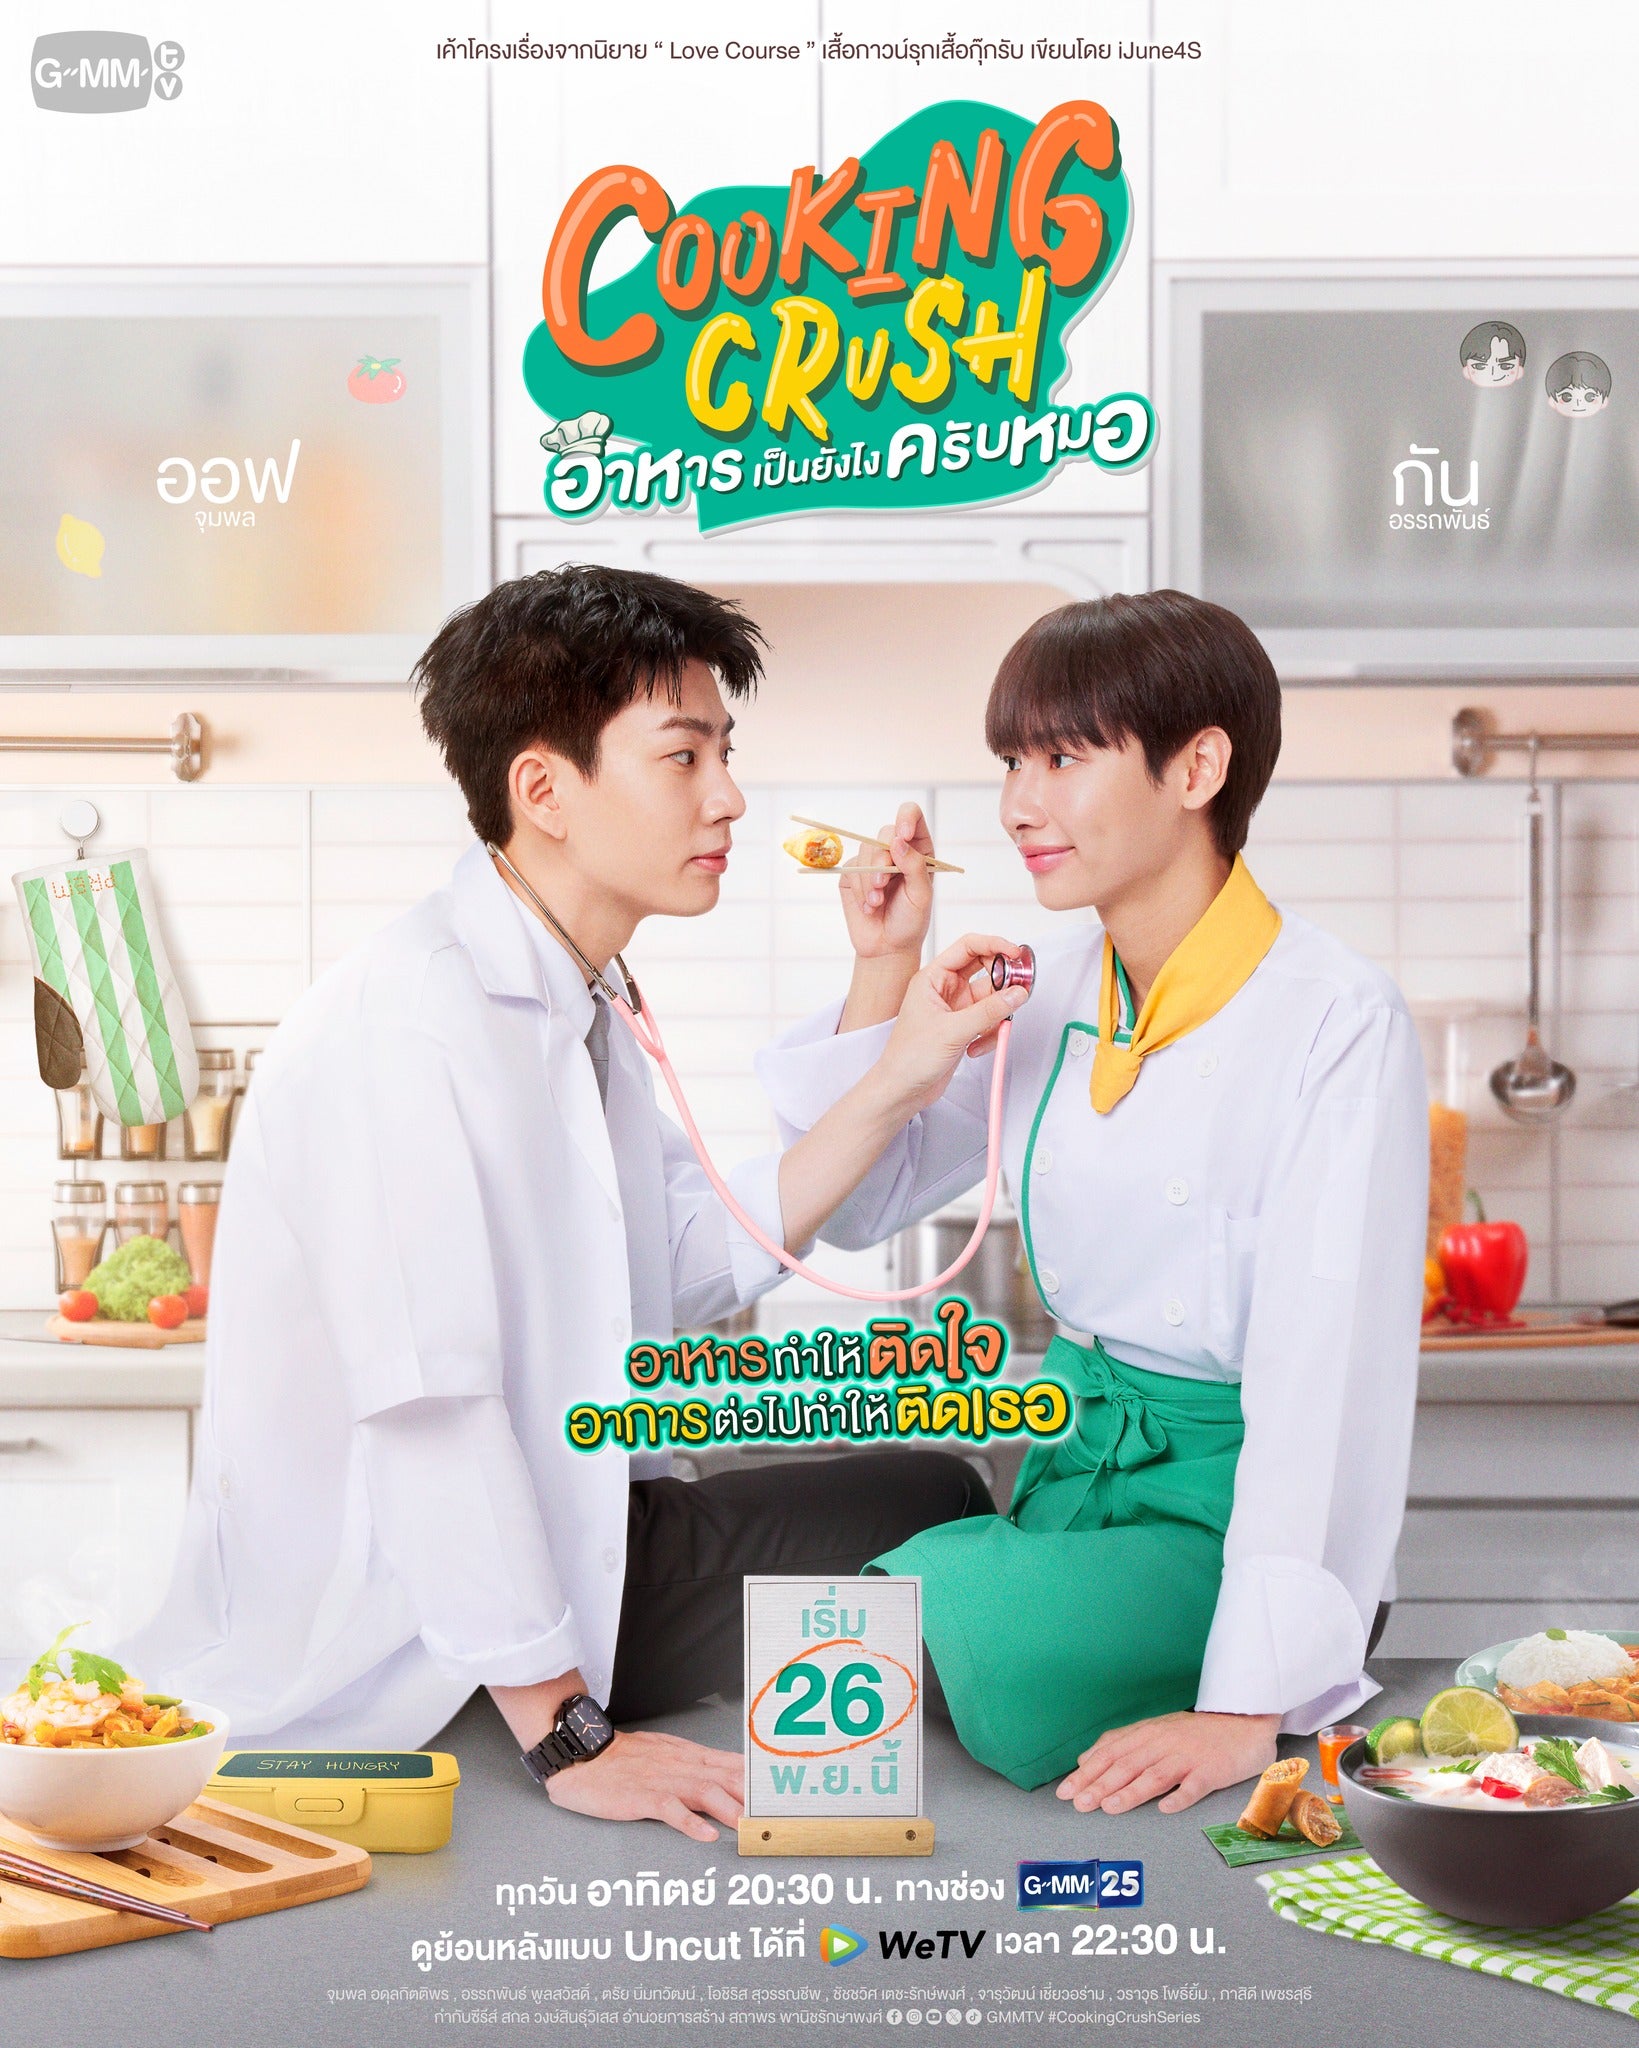 TV ratings for Cooking Crush (อาหารเป็นยังไงครับหมอ) in Colombia. wetv TV series